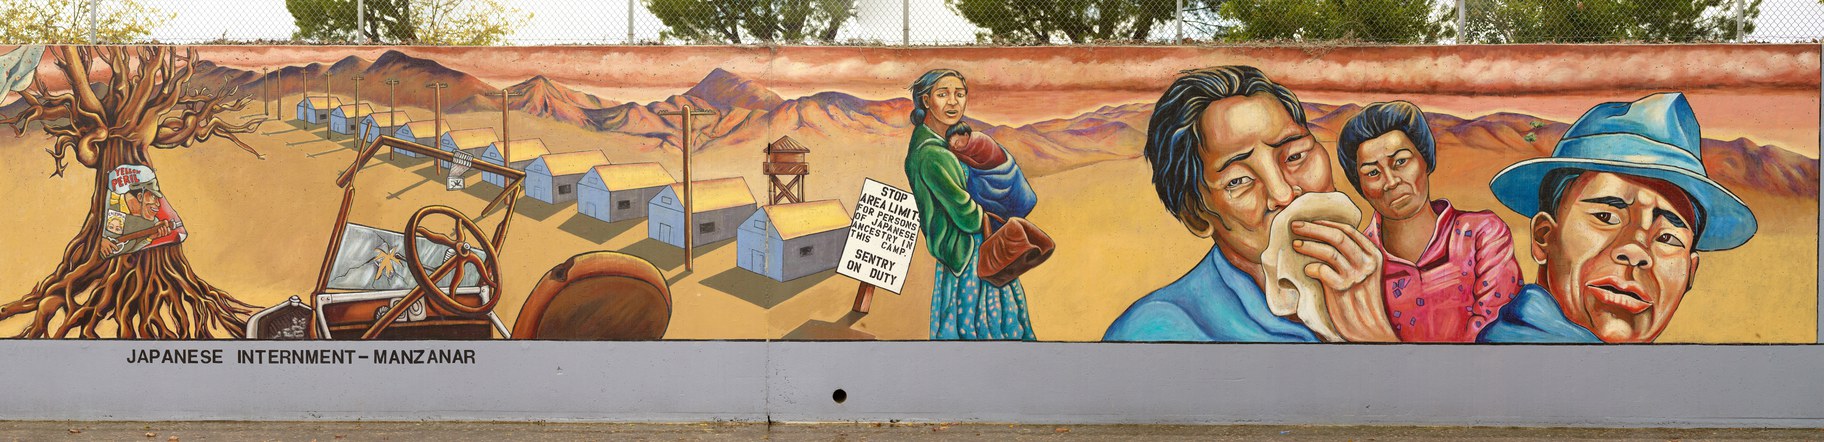 With 5 Million Grant Judy Baca S The Great Wall Of La Mural Will Grow From 2700 Feet To 1 Mile